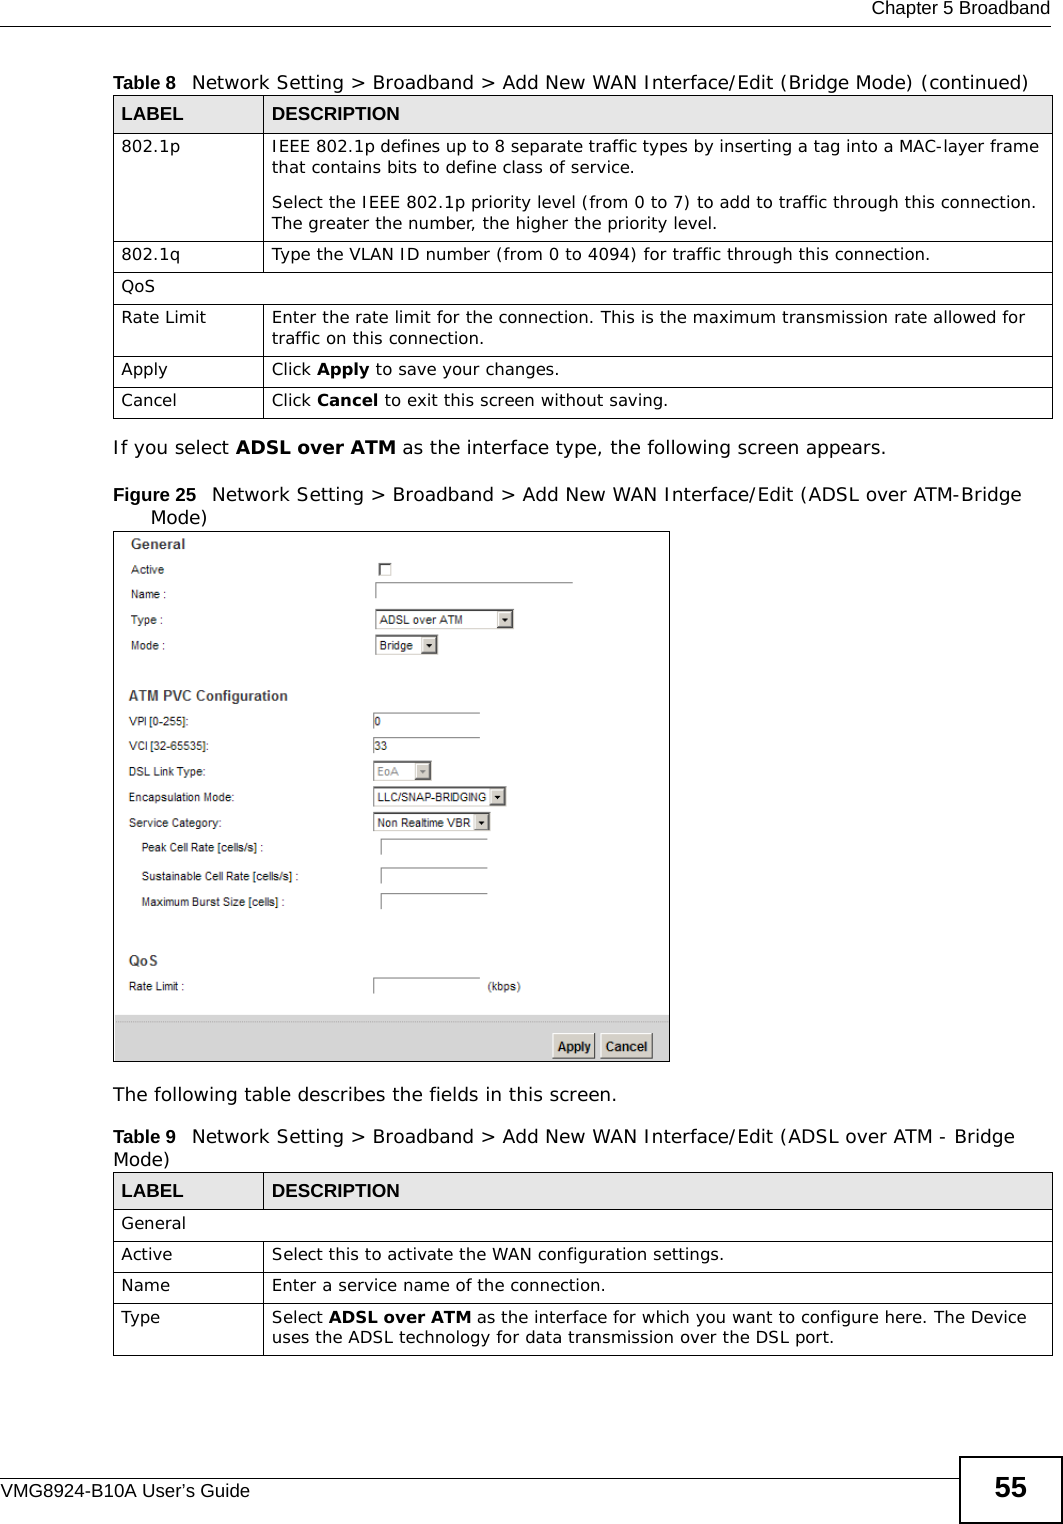  Chapter 5 BroadbandVMG8924-B10A User’s Guide 55If you select ADSL over ATM as the interface type, the following screen appears.Figure 25   Network Setting &gt; Broadband &gt; Add New WAN Interface/Edit (ADSL over ATM-Bridge Mode)The following table describes the fields in this screen.802.1p IEEE 802.1p defines up to 8 separate traffic types by inserting a tag into a MAC-layer frame that contains bits to define class of service. Select the IEEE 802.1p priority level (from 0 to 7) to add to traffic through this connection. The greater the number, the higher the priority level.802.1q Type the VLAN ID number (from 0 to 4094) for traffic through this connection.QoSRate Limit Enter the rate limit for the connection. This is the maximum transmission rate allowed for traffic on this connection.Apply Click Apply to save your changes.Cancel Click Cancel to exit this screen without saving.Table 9   Network Setting &gt; Broadband &gt; Add New WAN Interface/Edit (ADSL over ATM - Bridge Mode)LABEL DESCRIPTIONGeneralActive Select this to activate the WAN configuration settings.Name Enter a service name of the connection.Type Select ADSL over ATM as the interface for which you want to configure here. The Device uses the ADSL technology for data transmission over the DSL port.Table 8   Network Setting &gt; Broadband &gt; Add New WAN Interface/Edit (Bridge Mode) (continued)LABEL DESCRIPTION